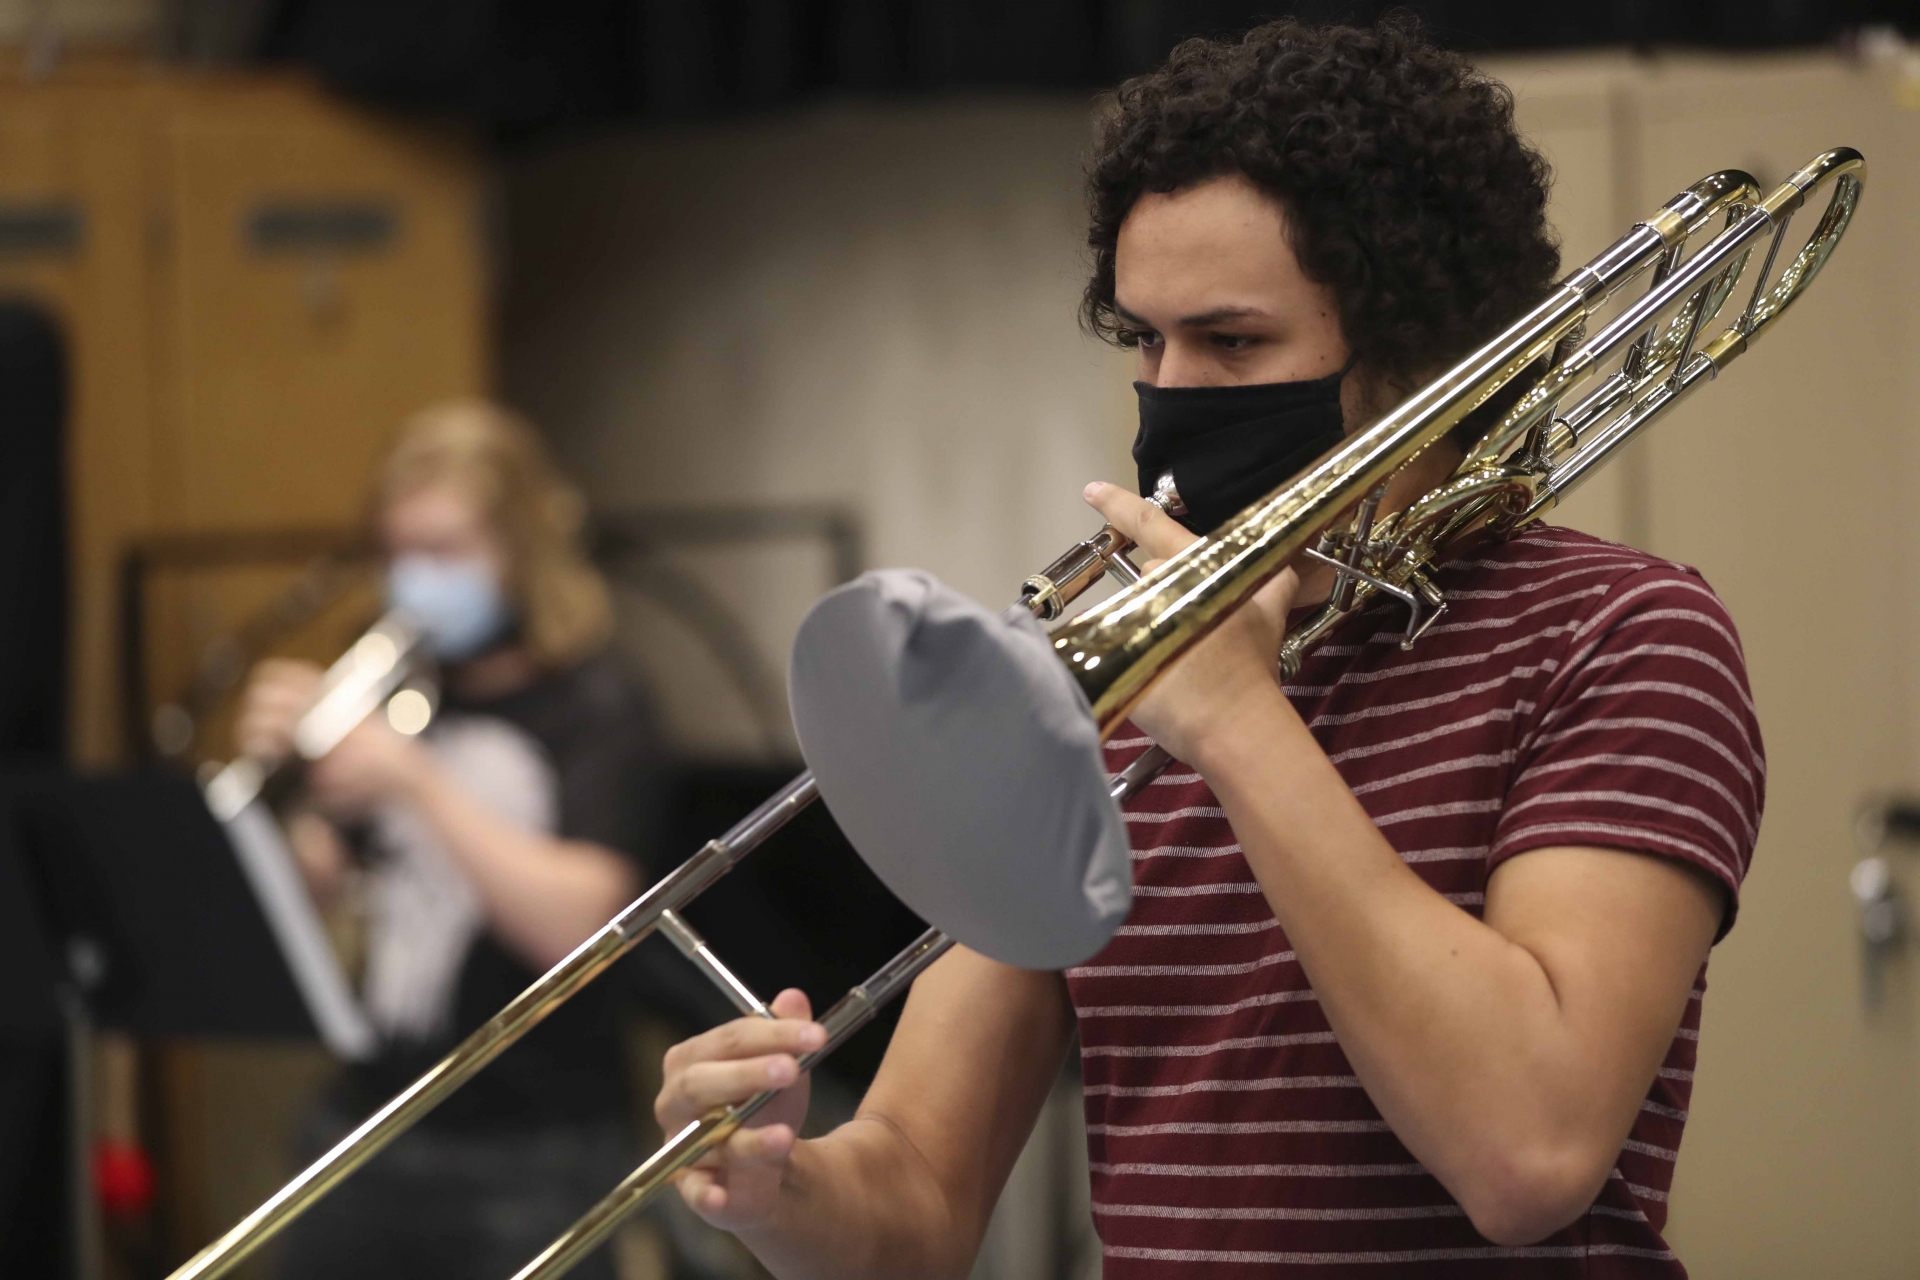 A student plays the trombone while following safety protocol to prevent the spread of COVID-19.